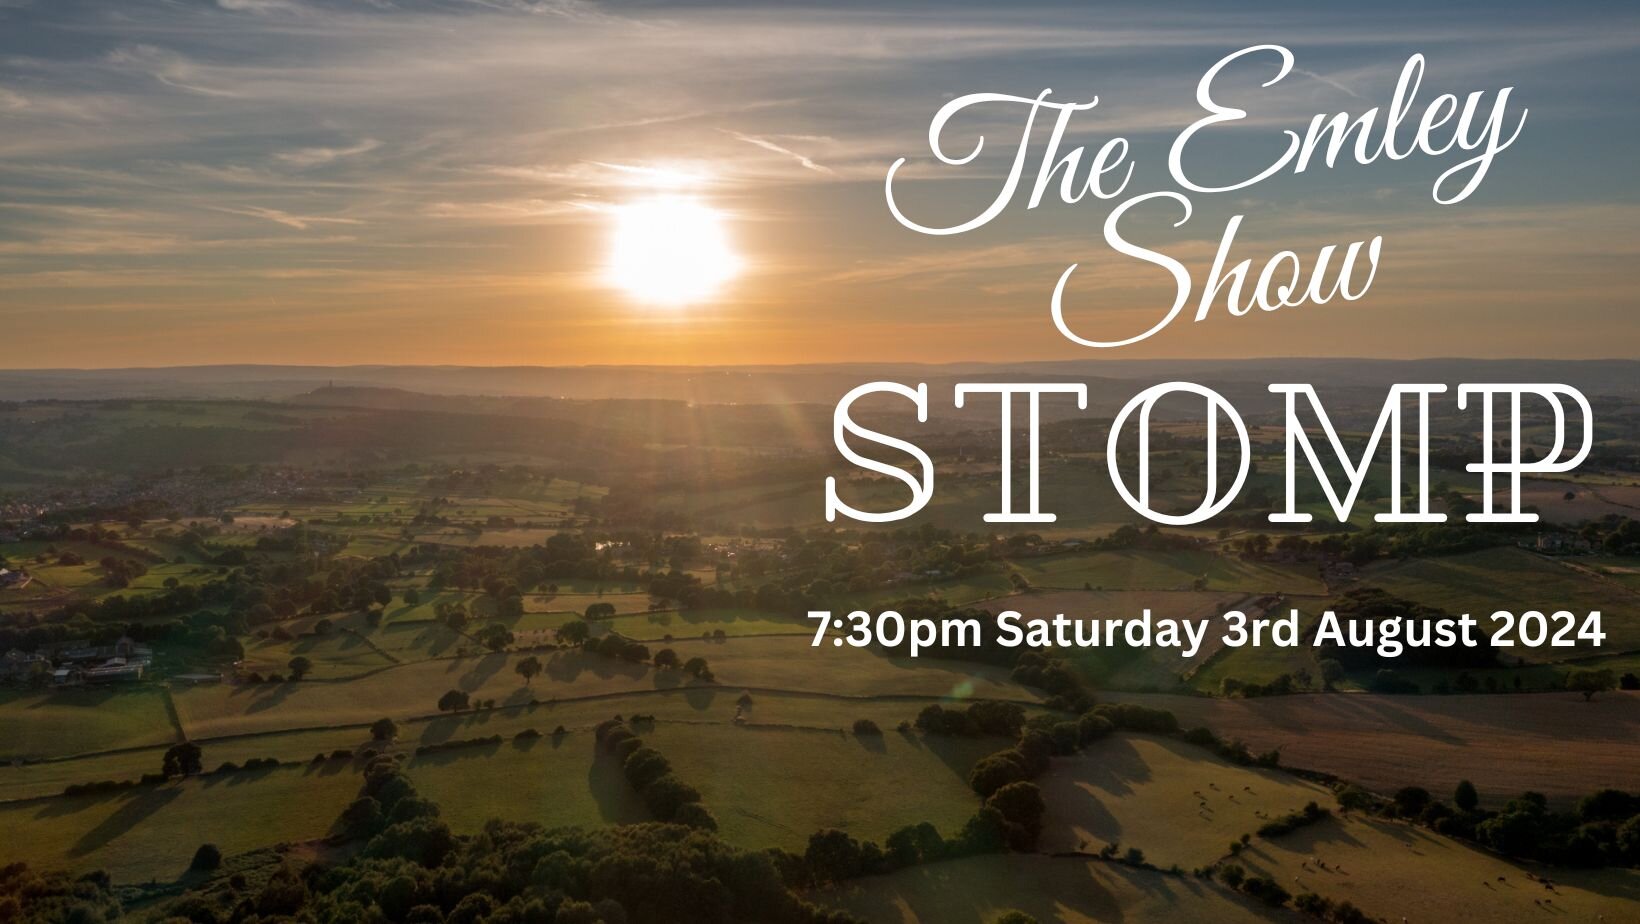 The Emley Show Stomp 2024